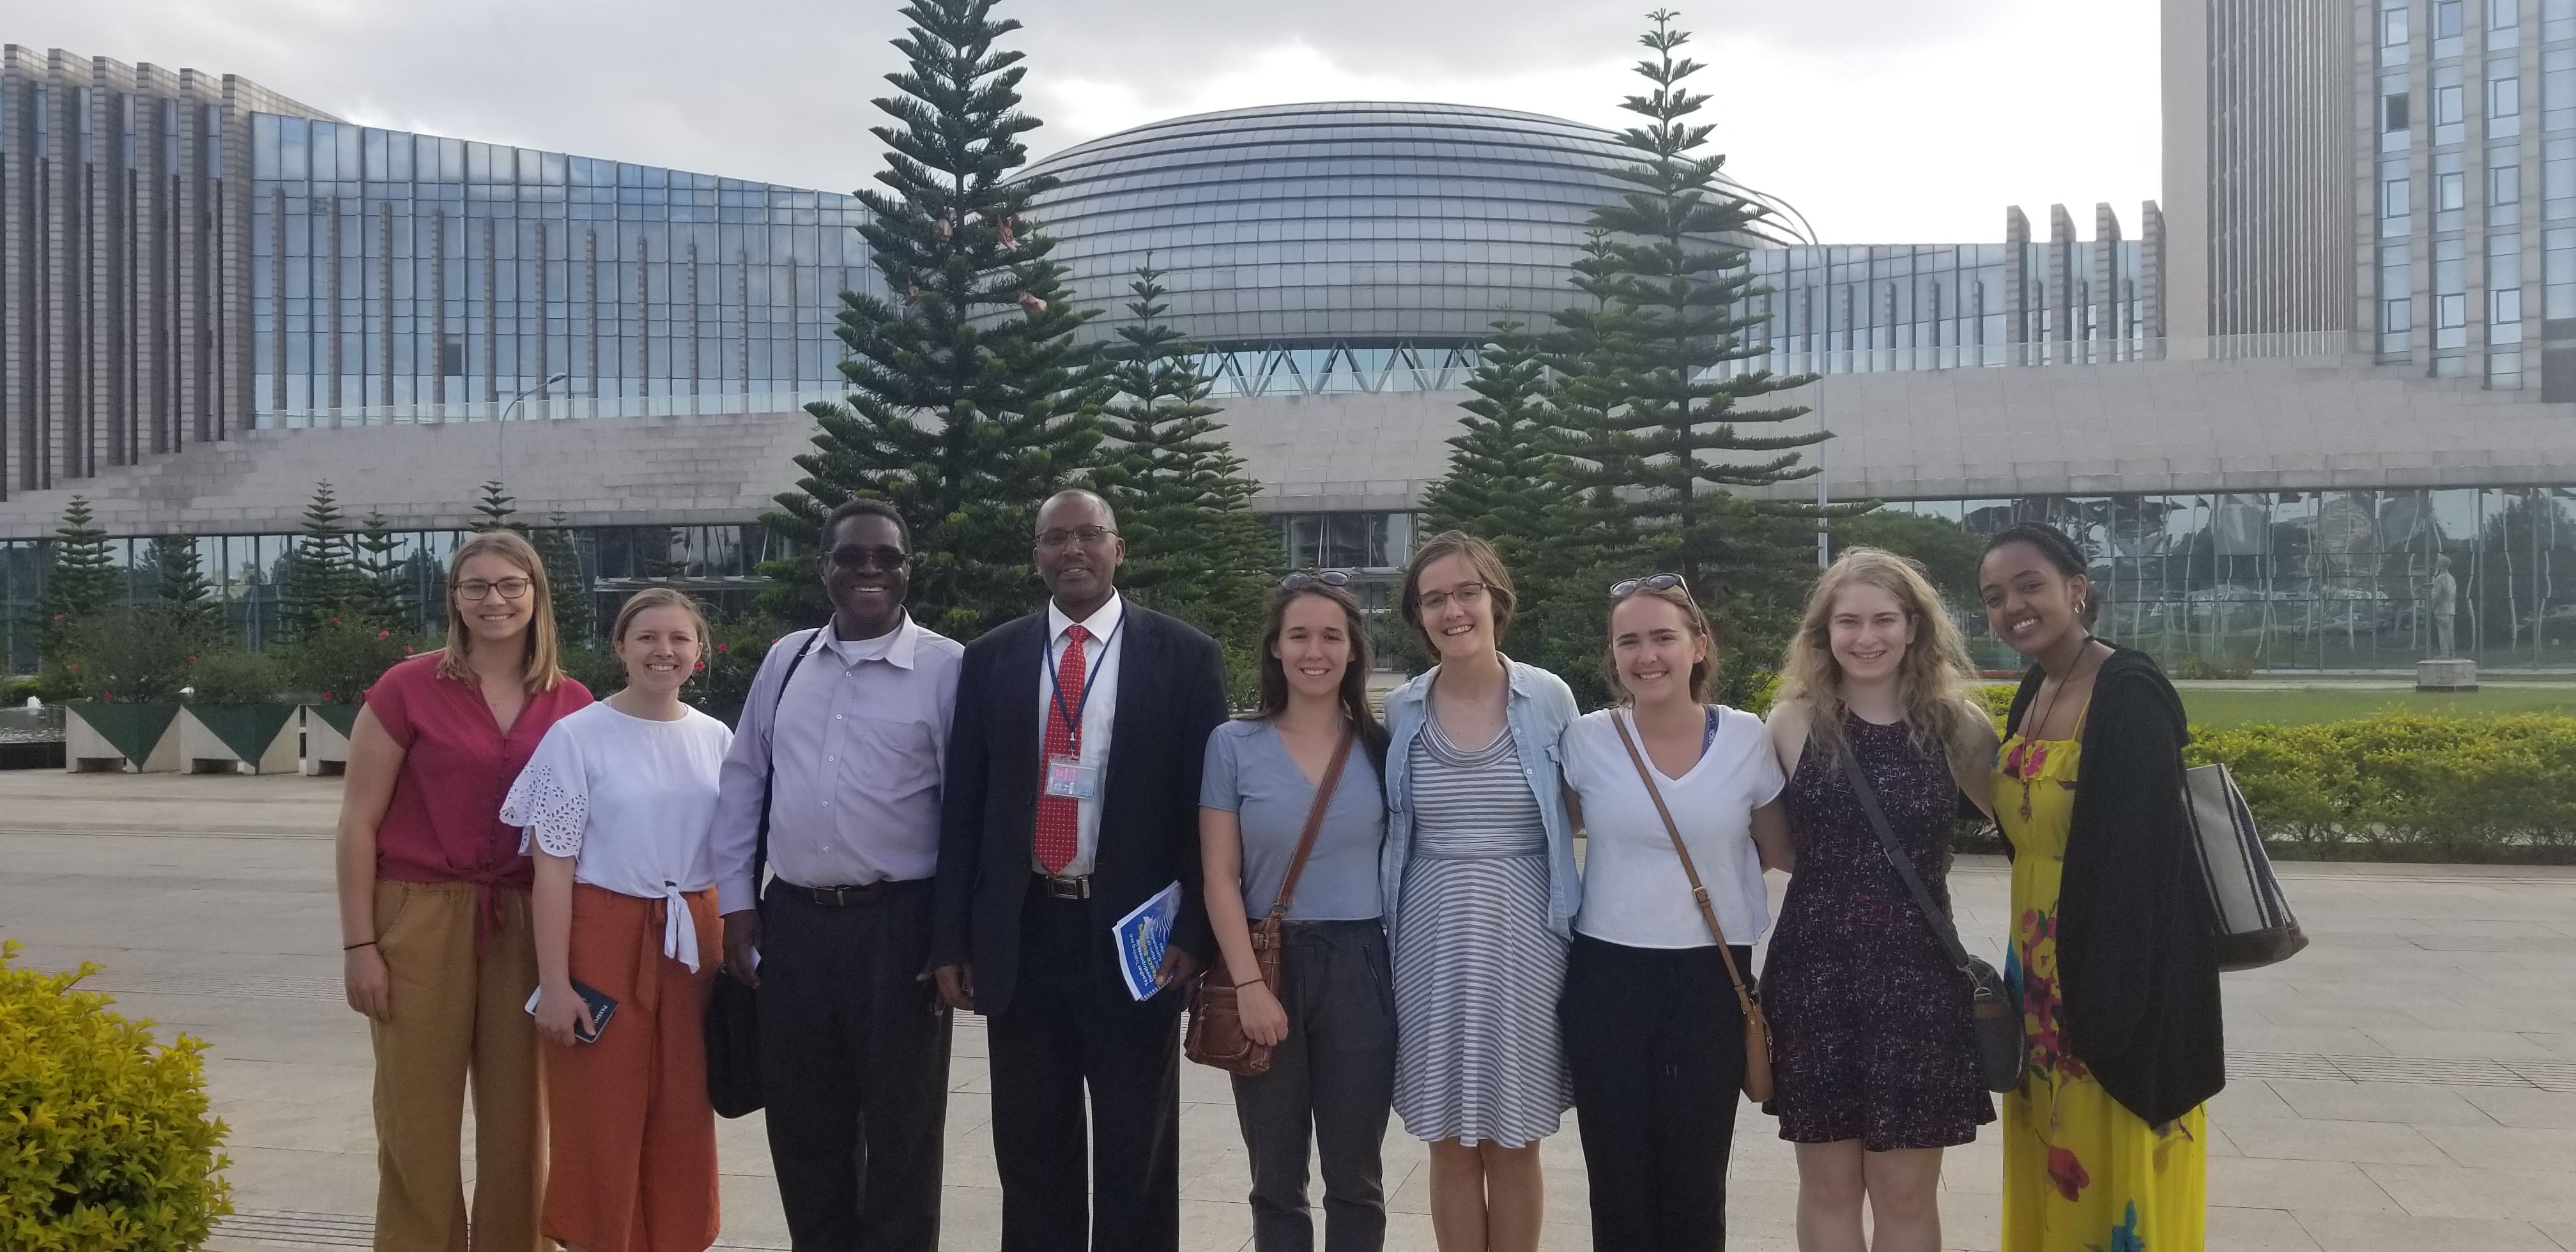 Dr. Onyeiwu with students visiting the African Union. The imposing and magnificent building in the background was donated by the Chinese government to the African Union.